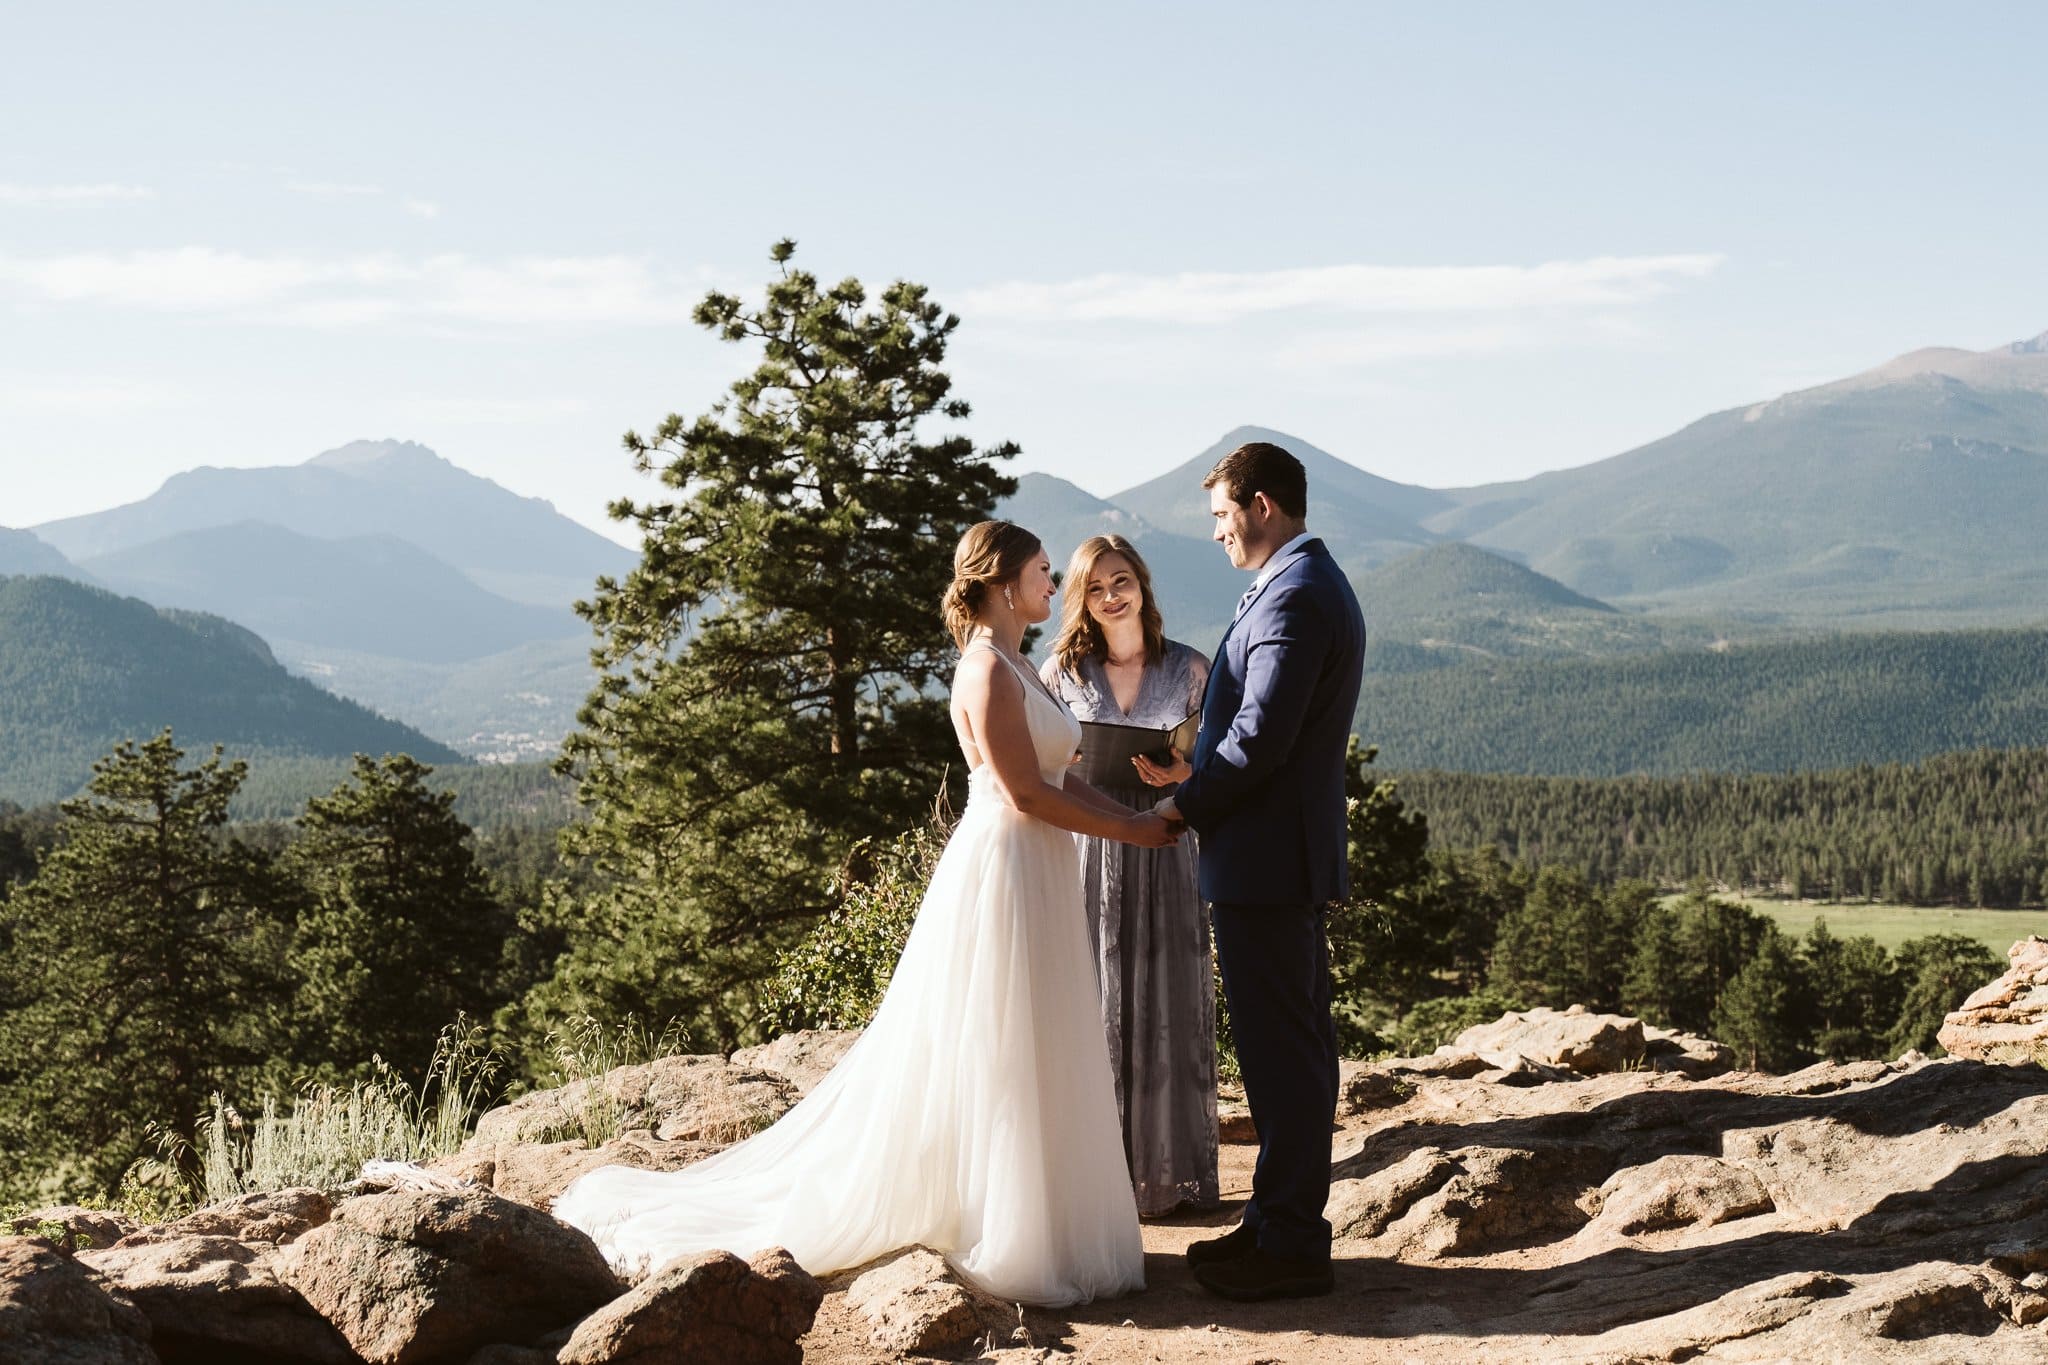 Colorado Elopement Guide Best Places To Elope Checklist And Planning,Basement Flooring Laminate